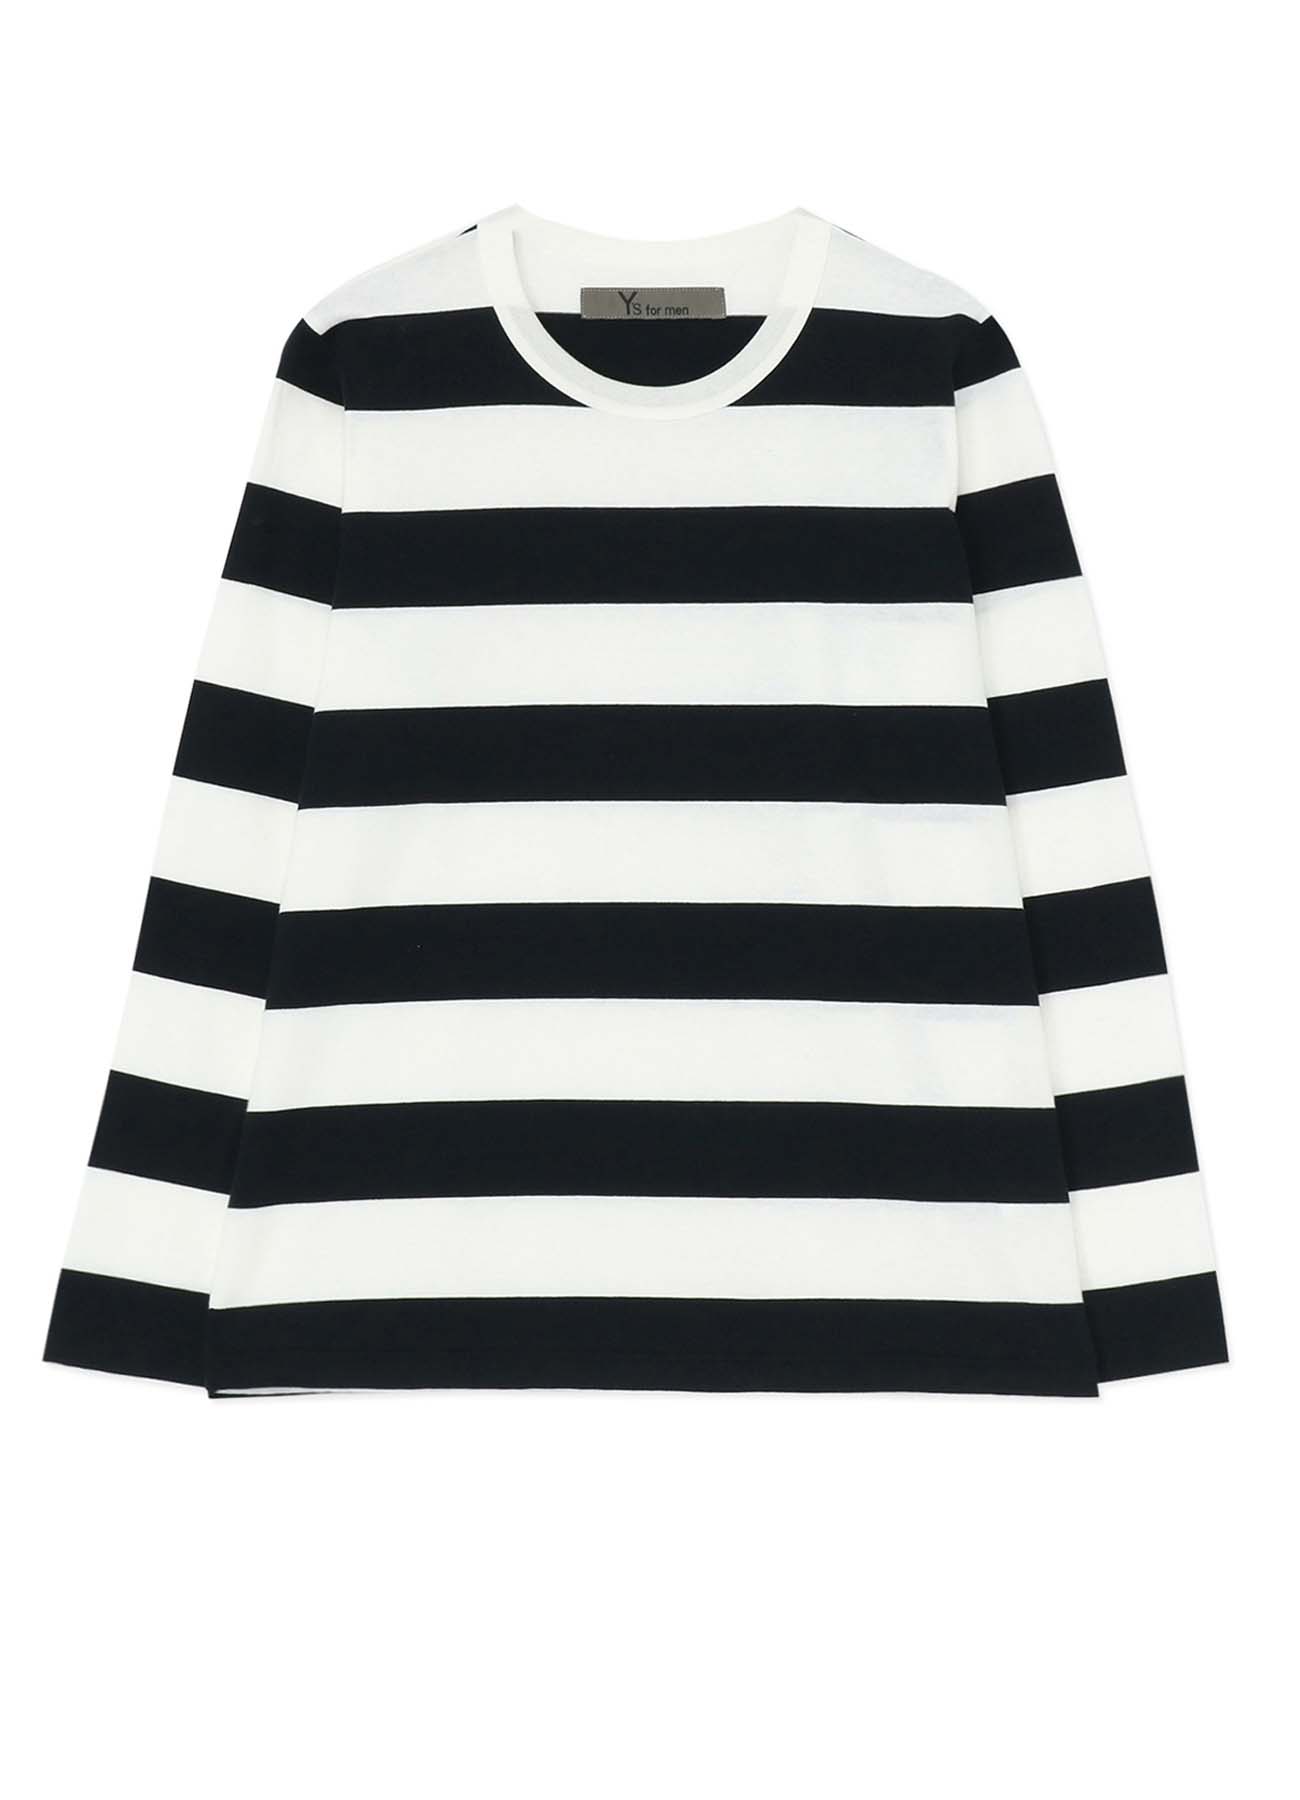 LONG SLEEVE T-SHIRT WITH STRIPES